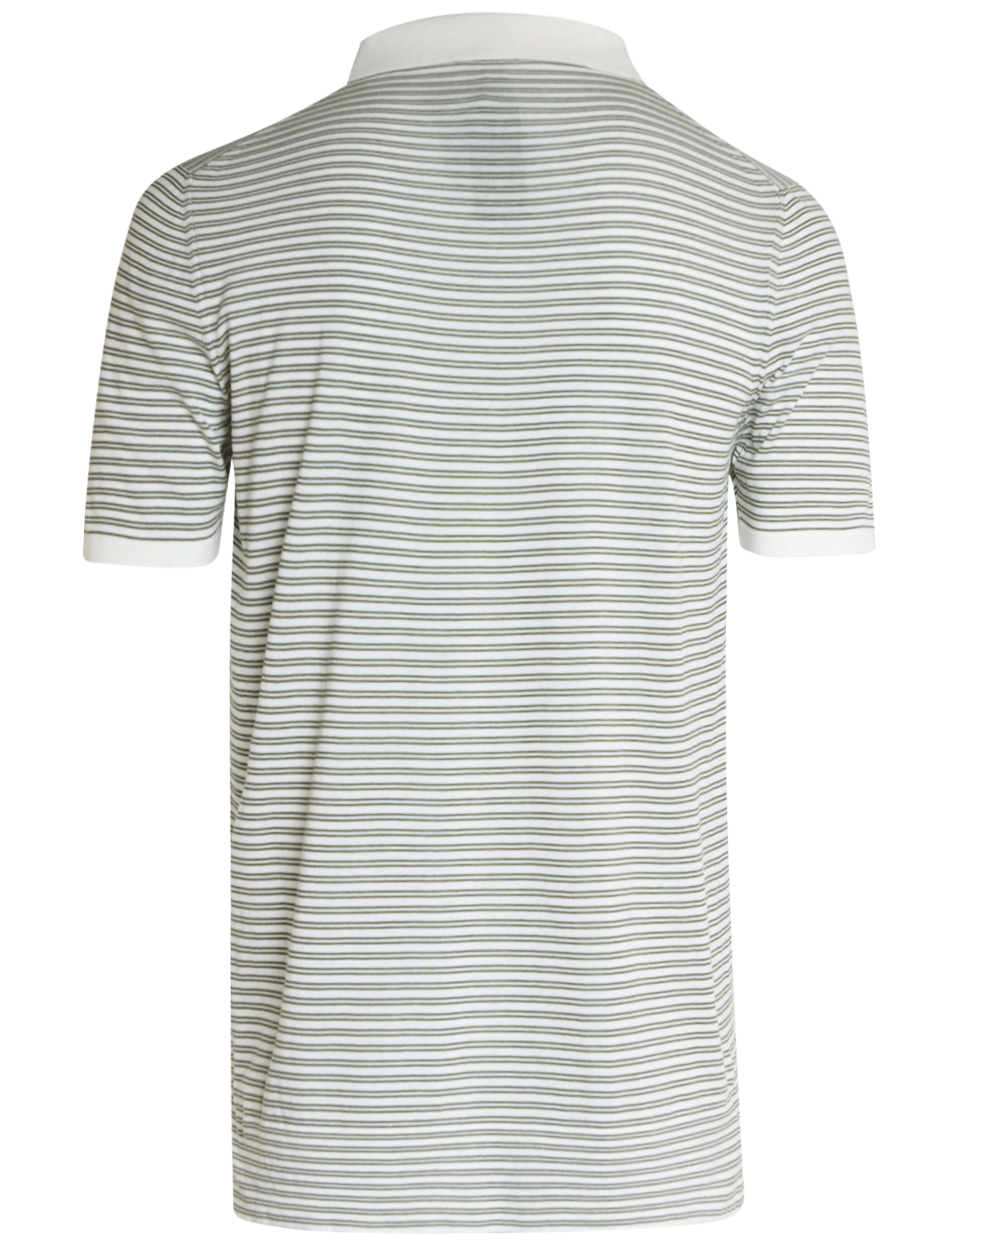 Army Green and White Striped Cotton Short Sleeve Polo